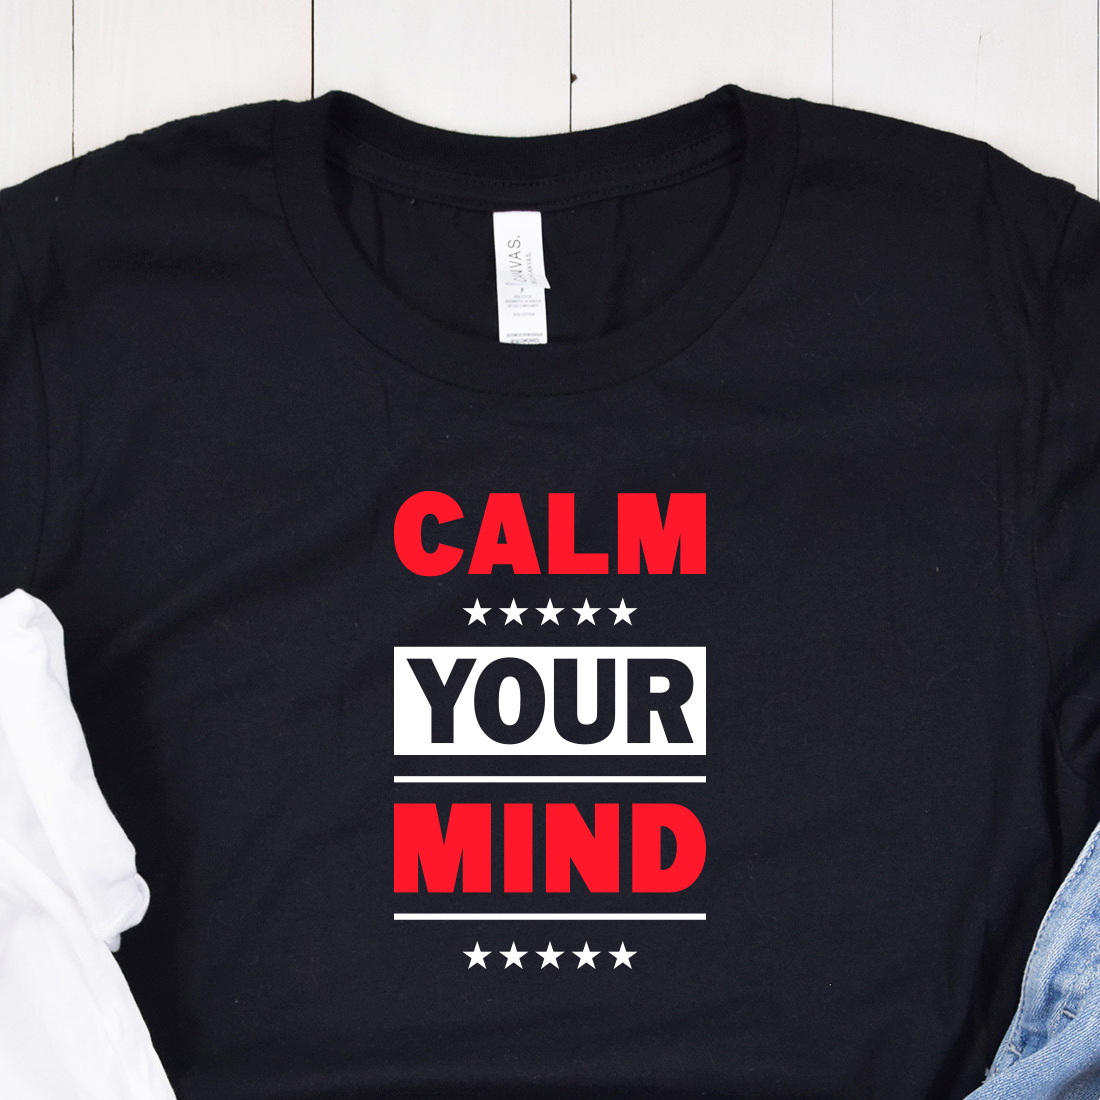 Image of a black t-shirt with an irresistible slogan "Calm your mind" in white and red.